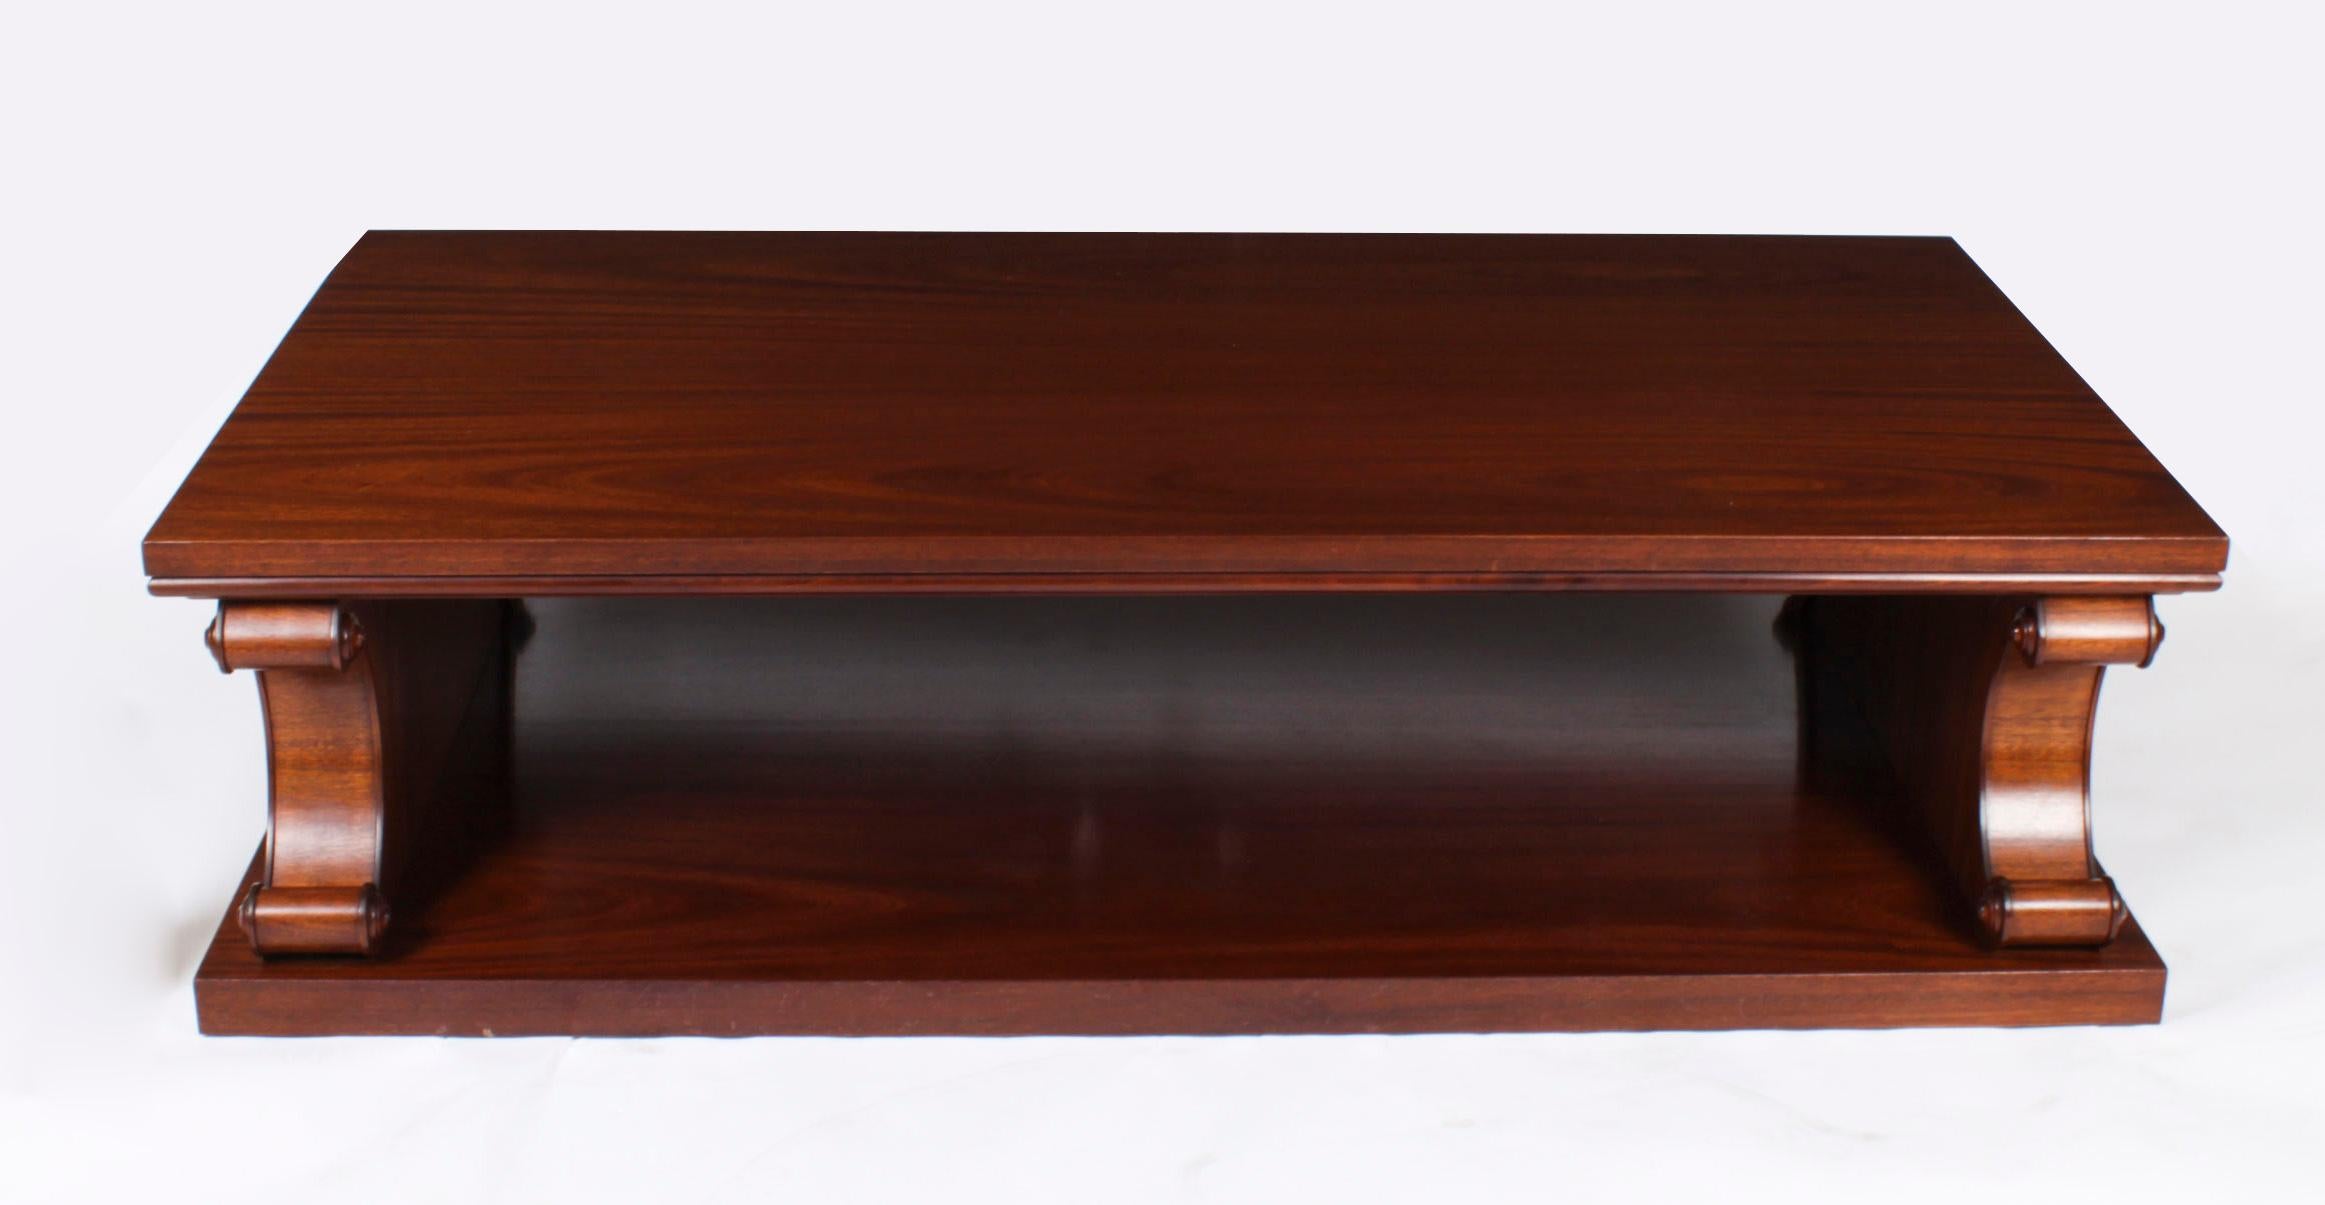 This is a large stunning Regency Revival Vintage mahogany rectangular two tier  coffee table on dual scroll supports, dating from the last quarter of the 20th century.

Provenance:
House on Belgrave Square, London

THE BOTANICAL NAME FOR THE